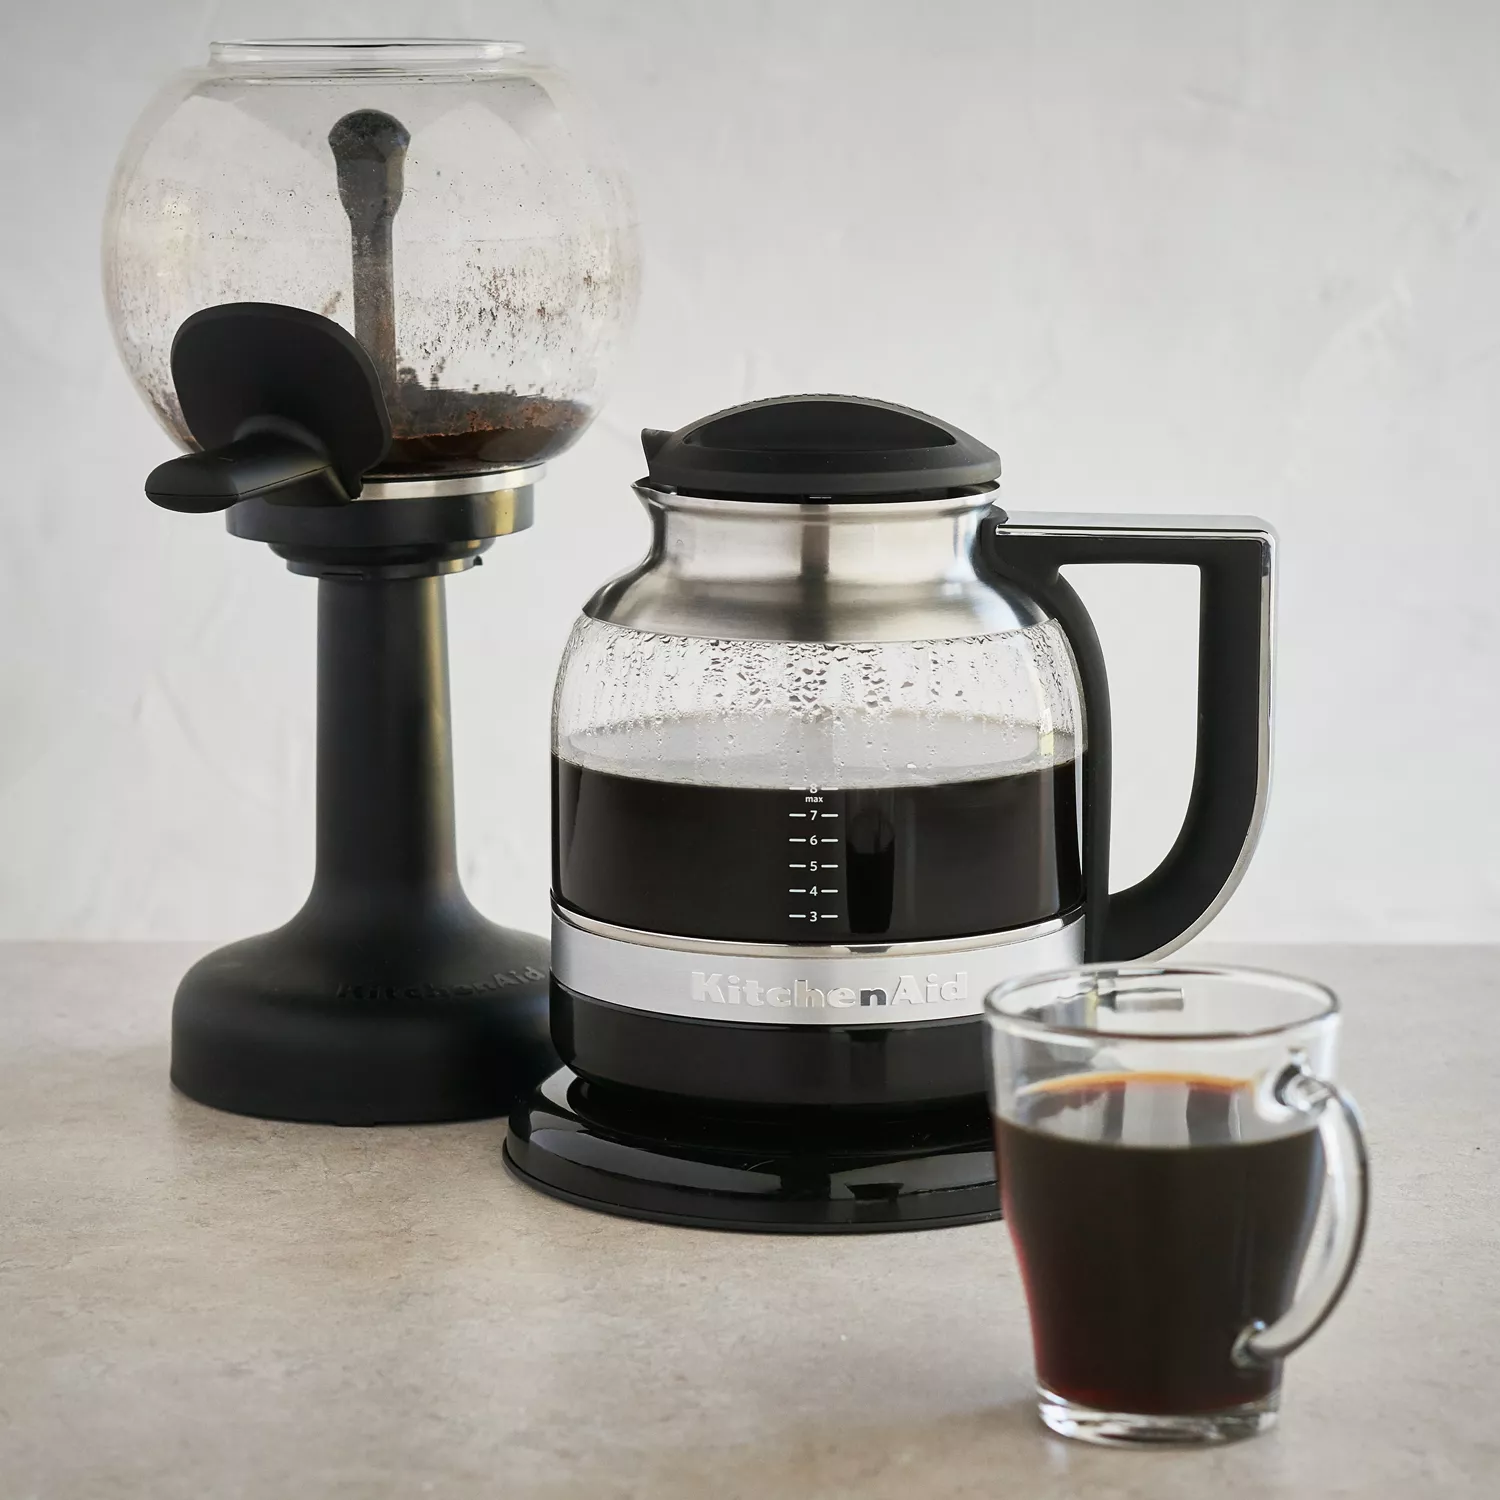 Kitchenaid Siphon Coffee Brewer, Atg Archive